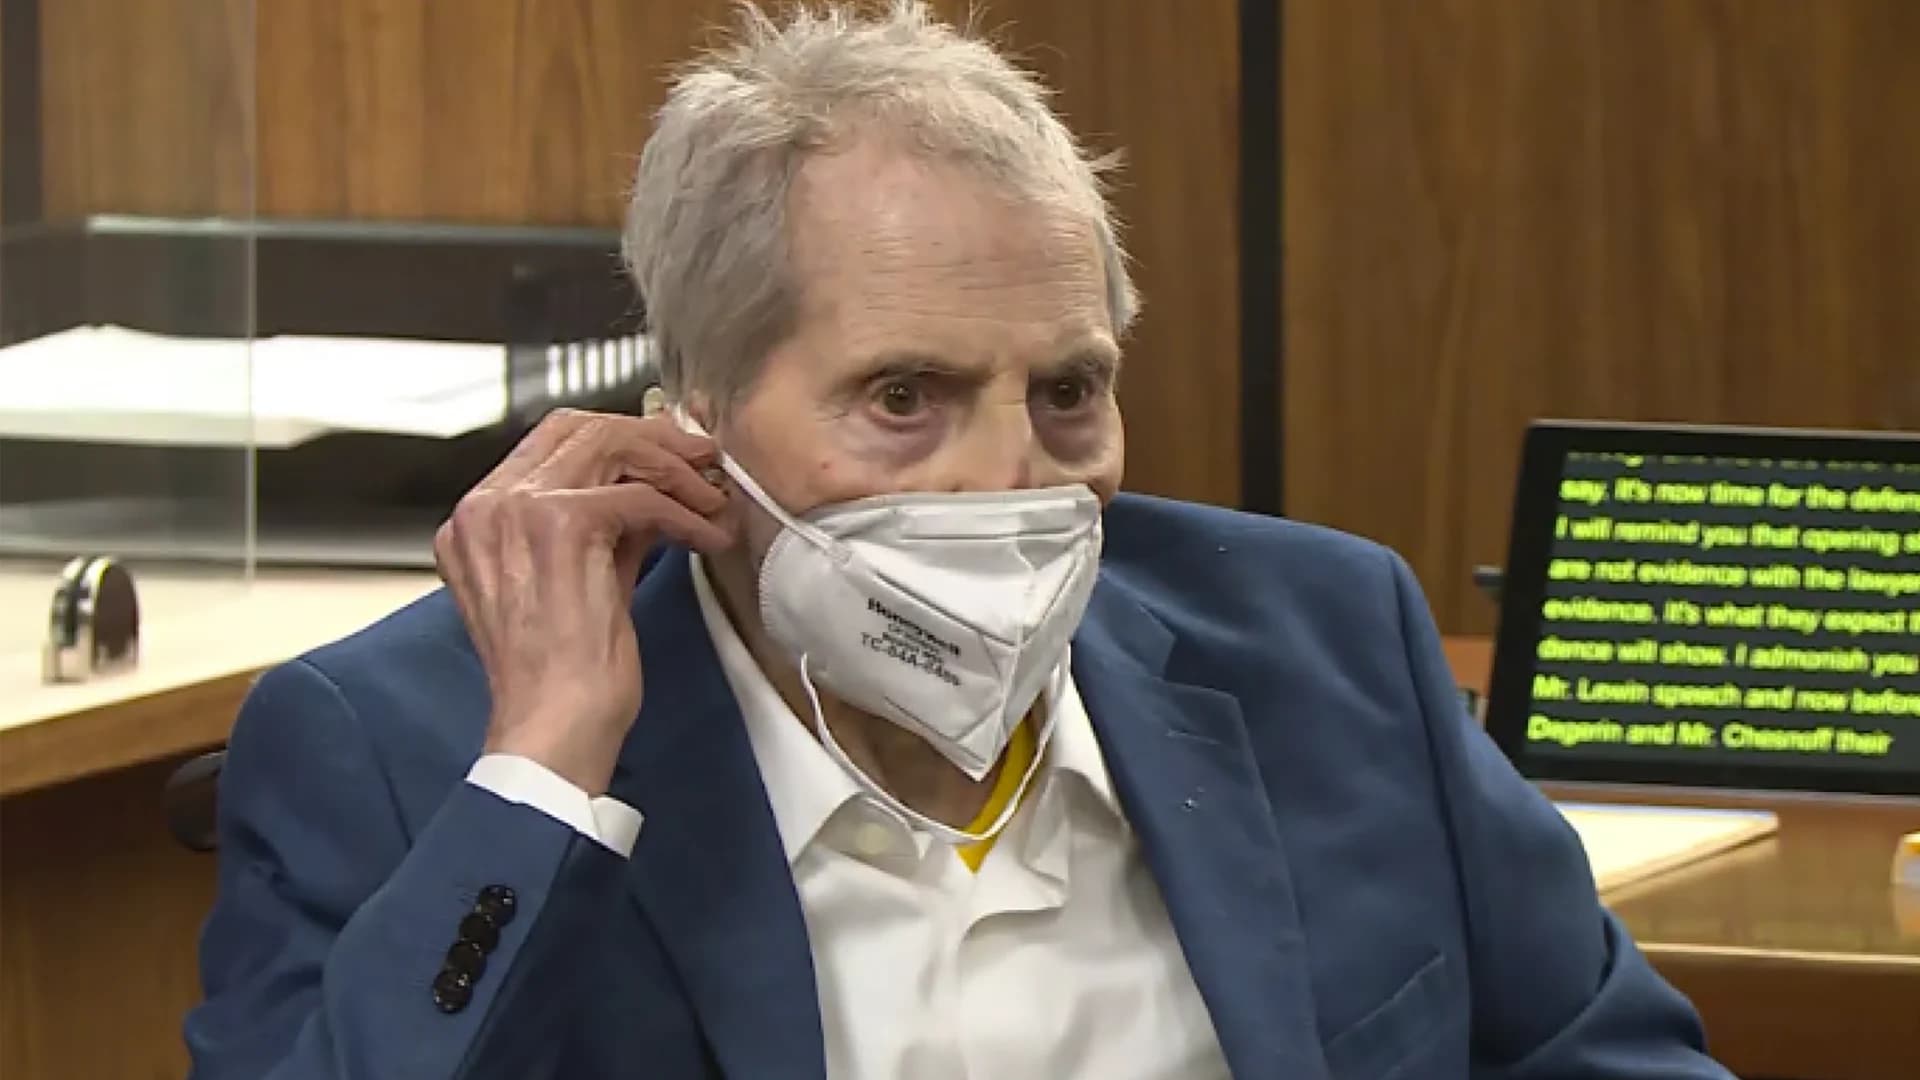 Robert Durst's lawyer moves for mistrial on health grounds